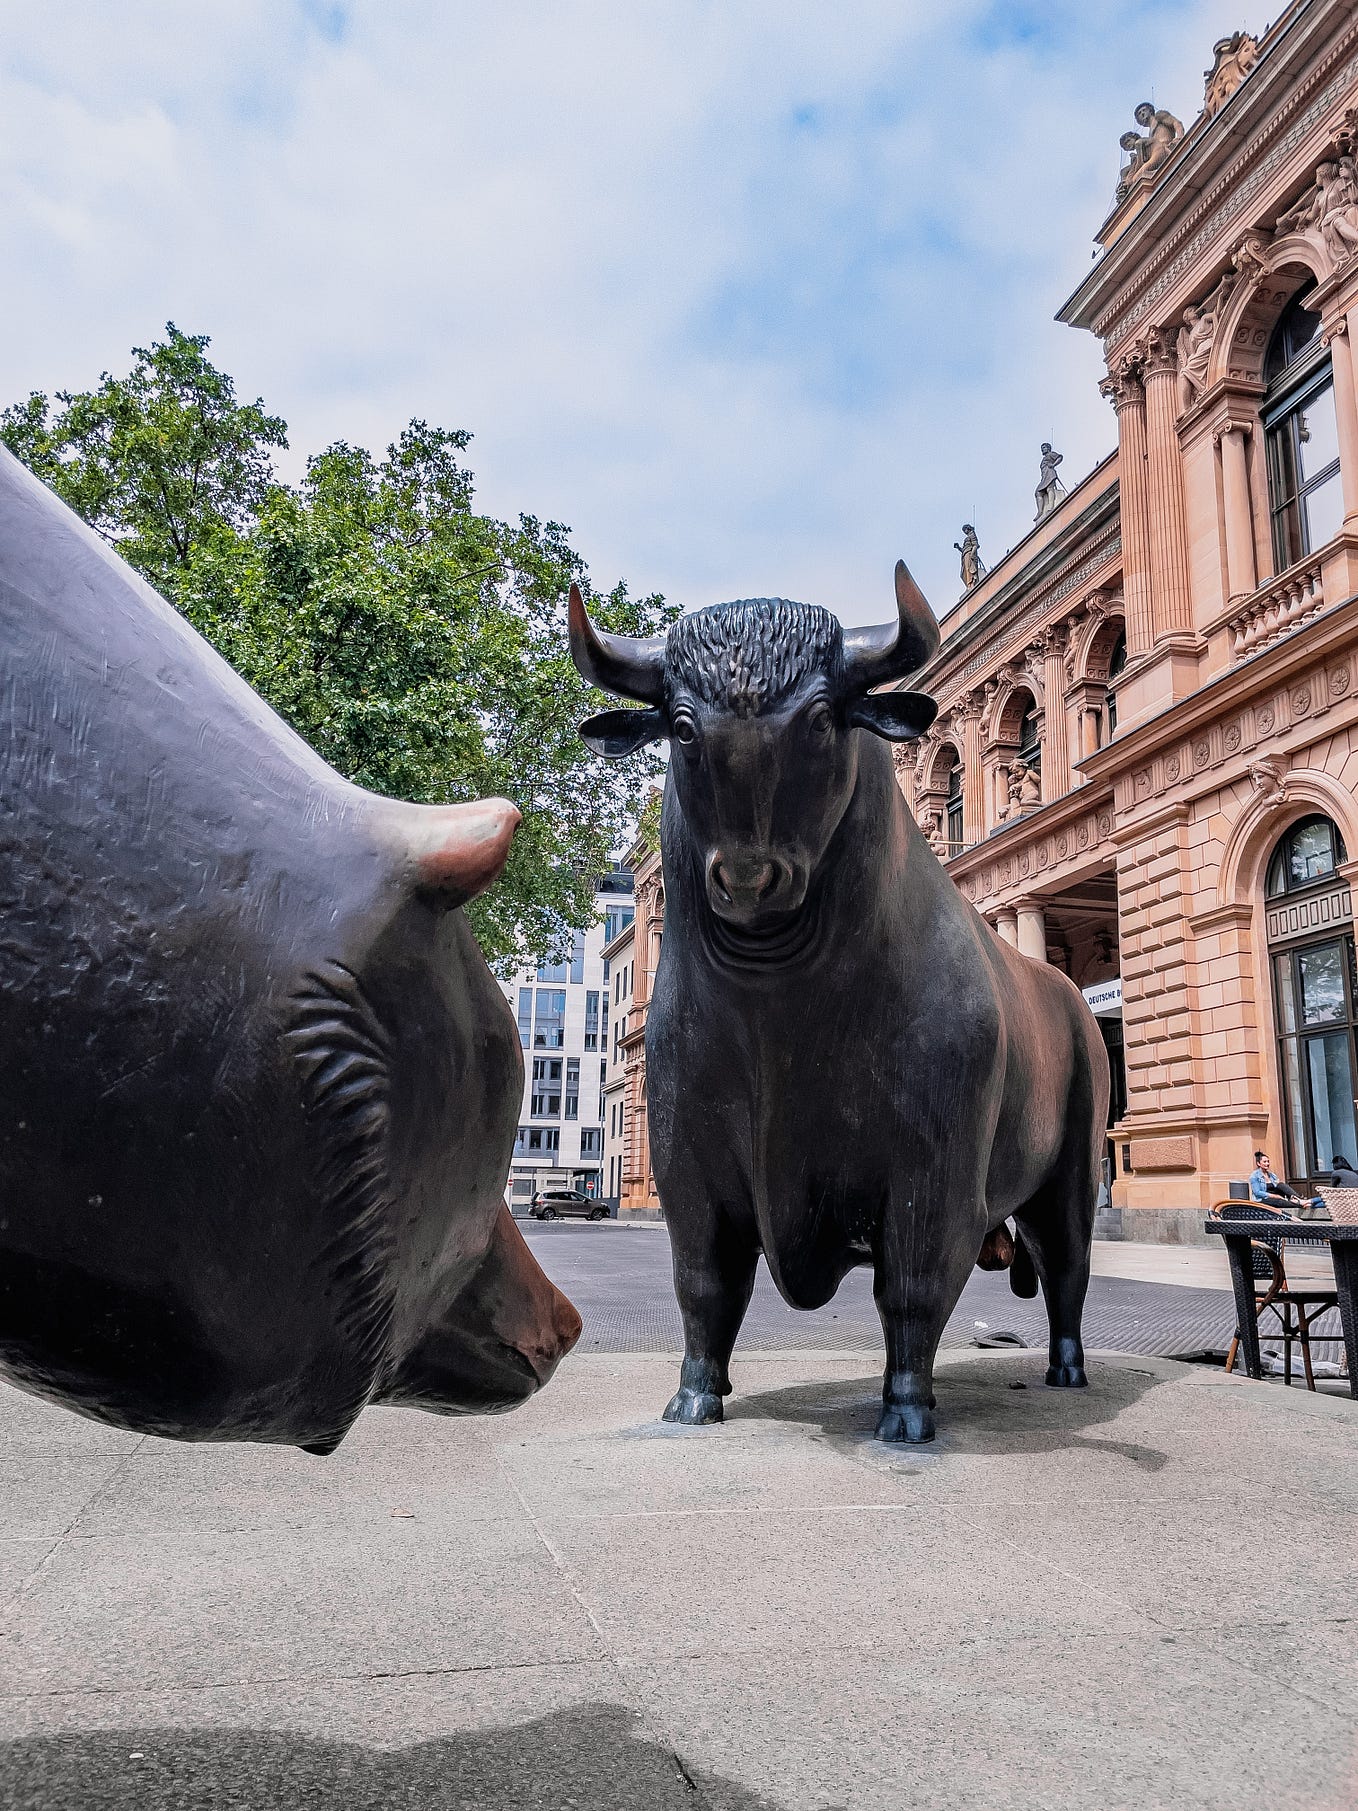 The Market is Bearish: what does this mean?